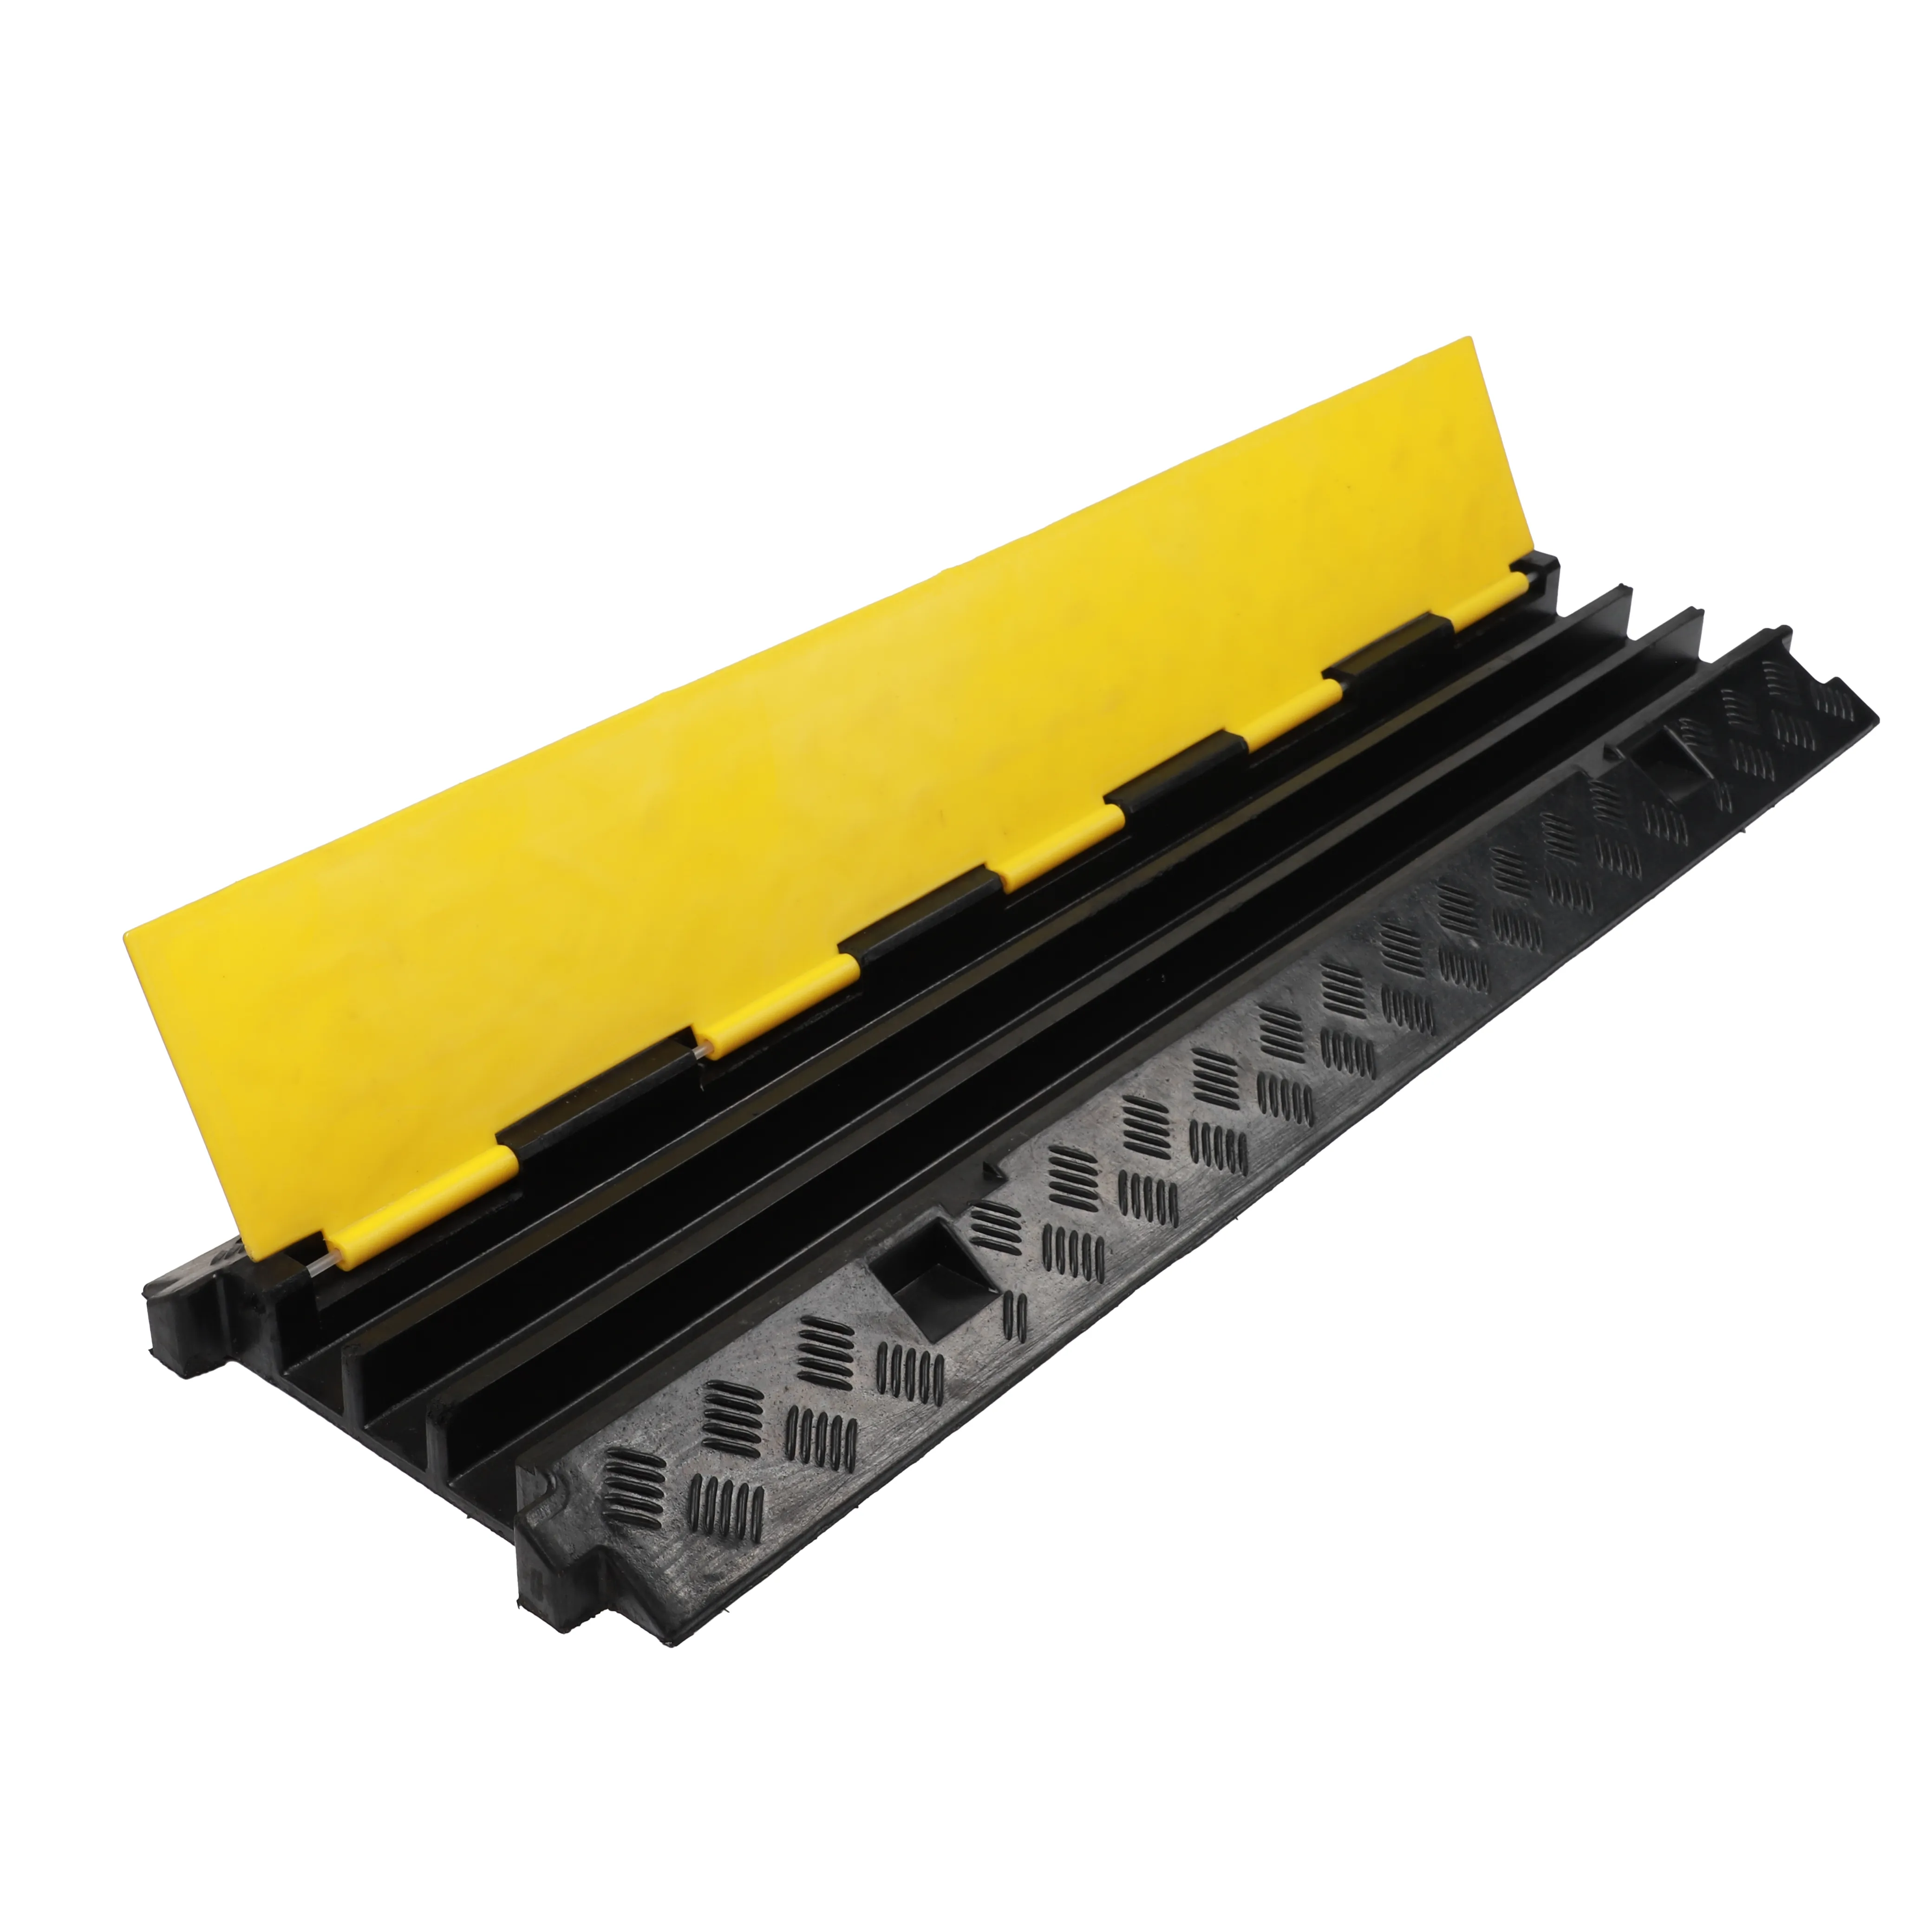 Pvc Yellow Protective Cover 3 Channel Cable Guards Rubber Cable Protector Ramp Speed Humps